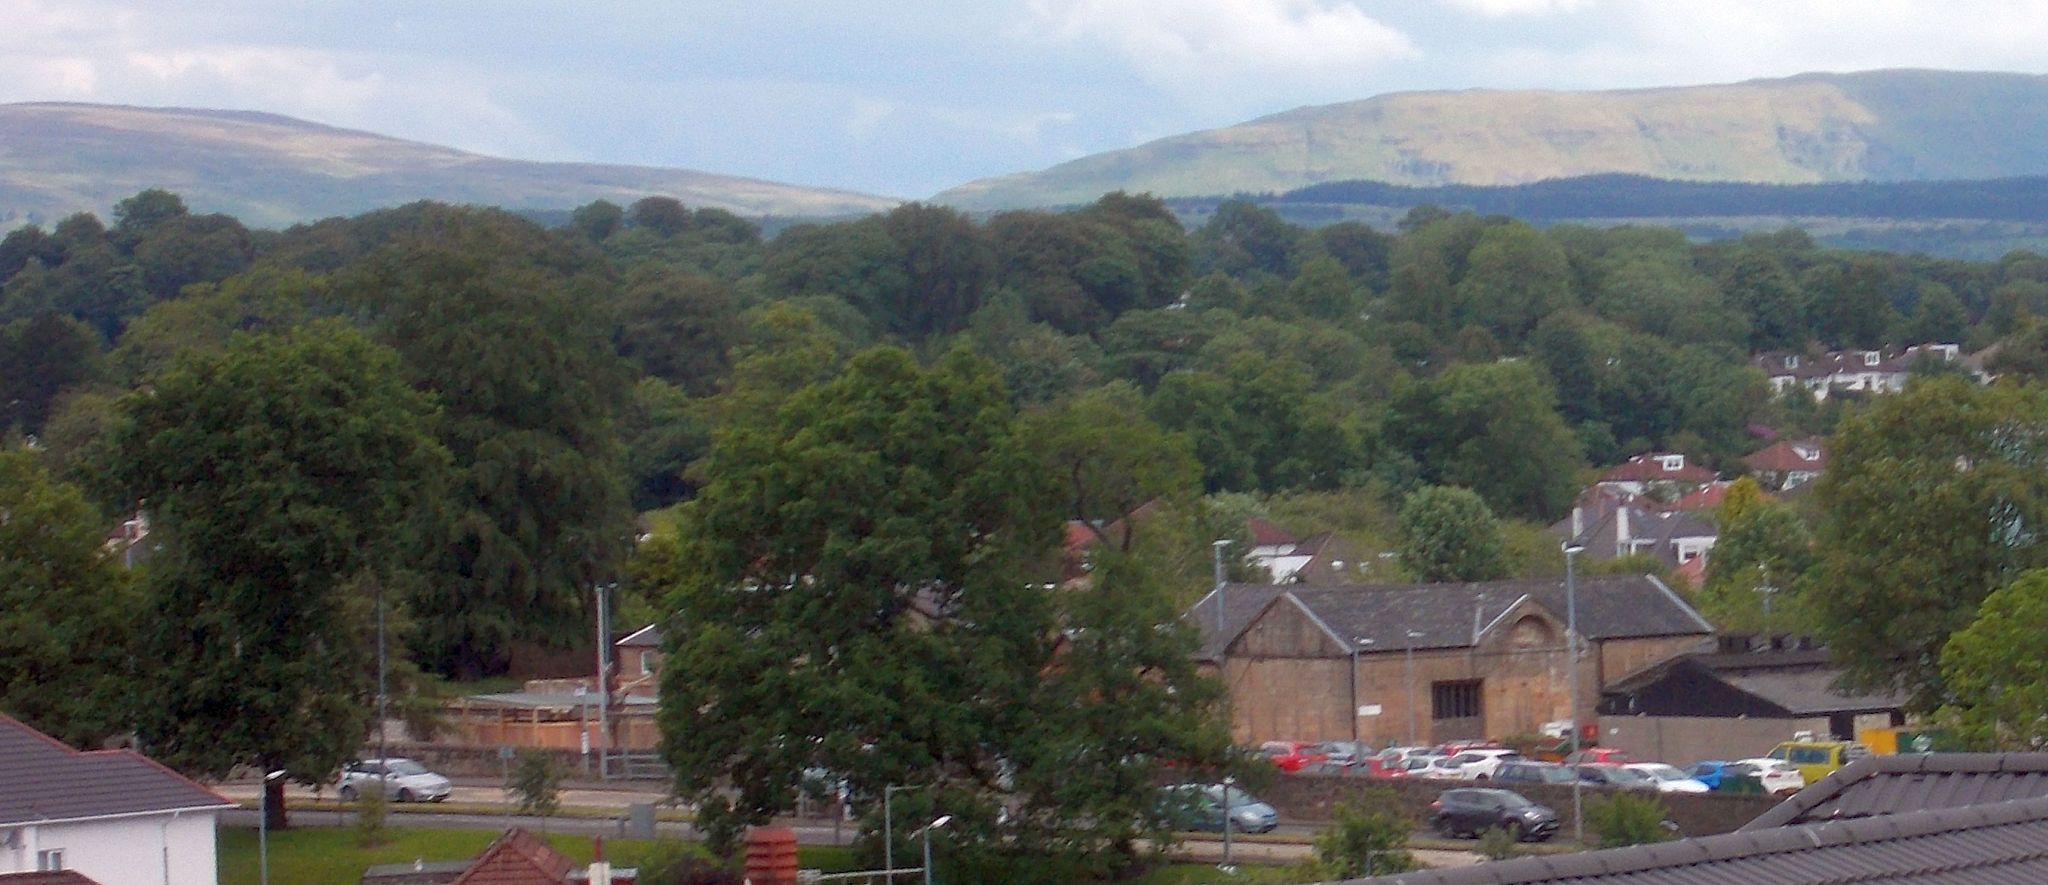 Campsie Fells from Cairnhill Woods in Westerton